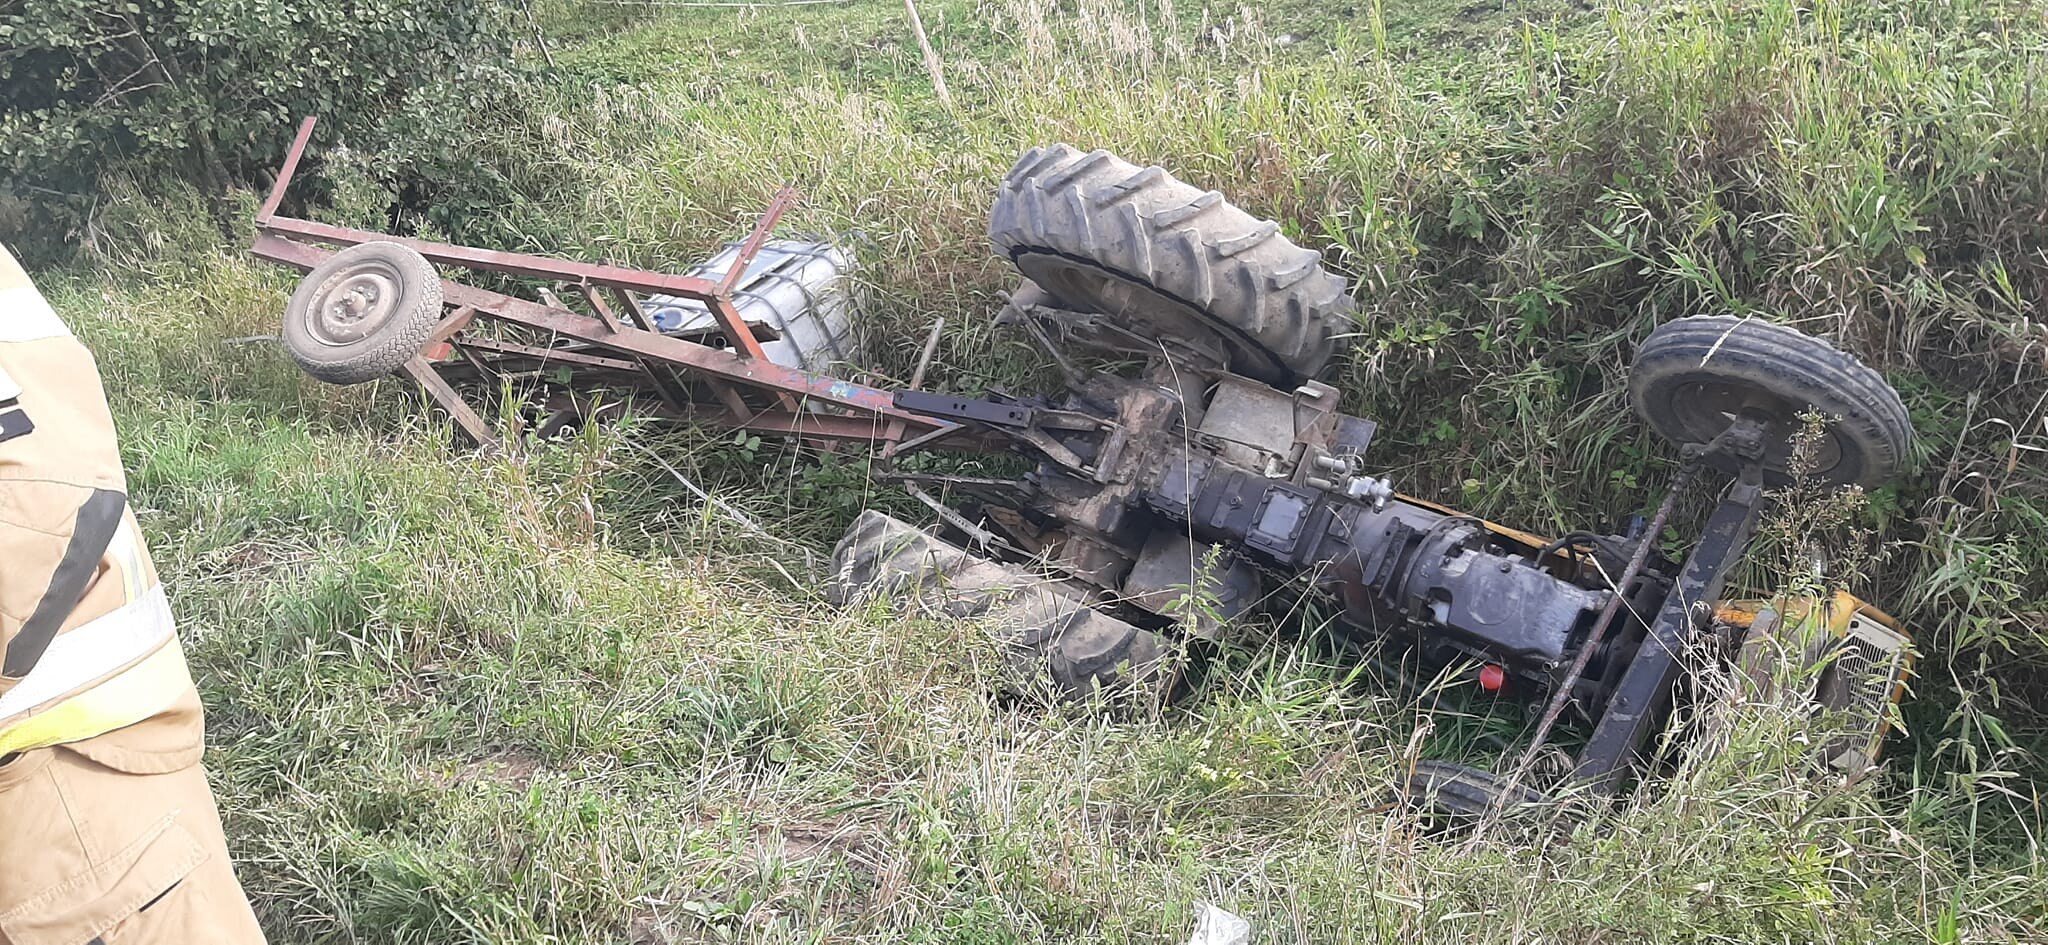 The 12-year-old got into the tractor.  The machine crushed the boy